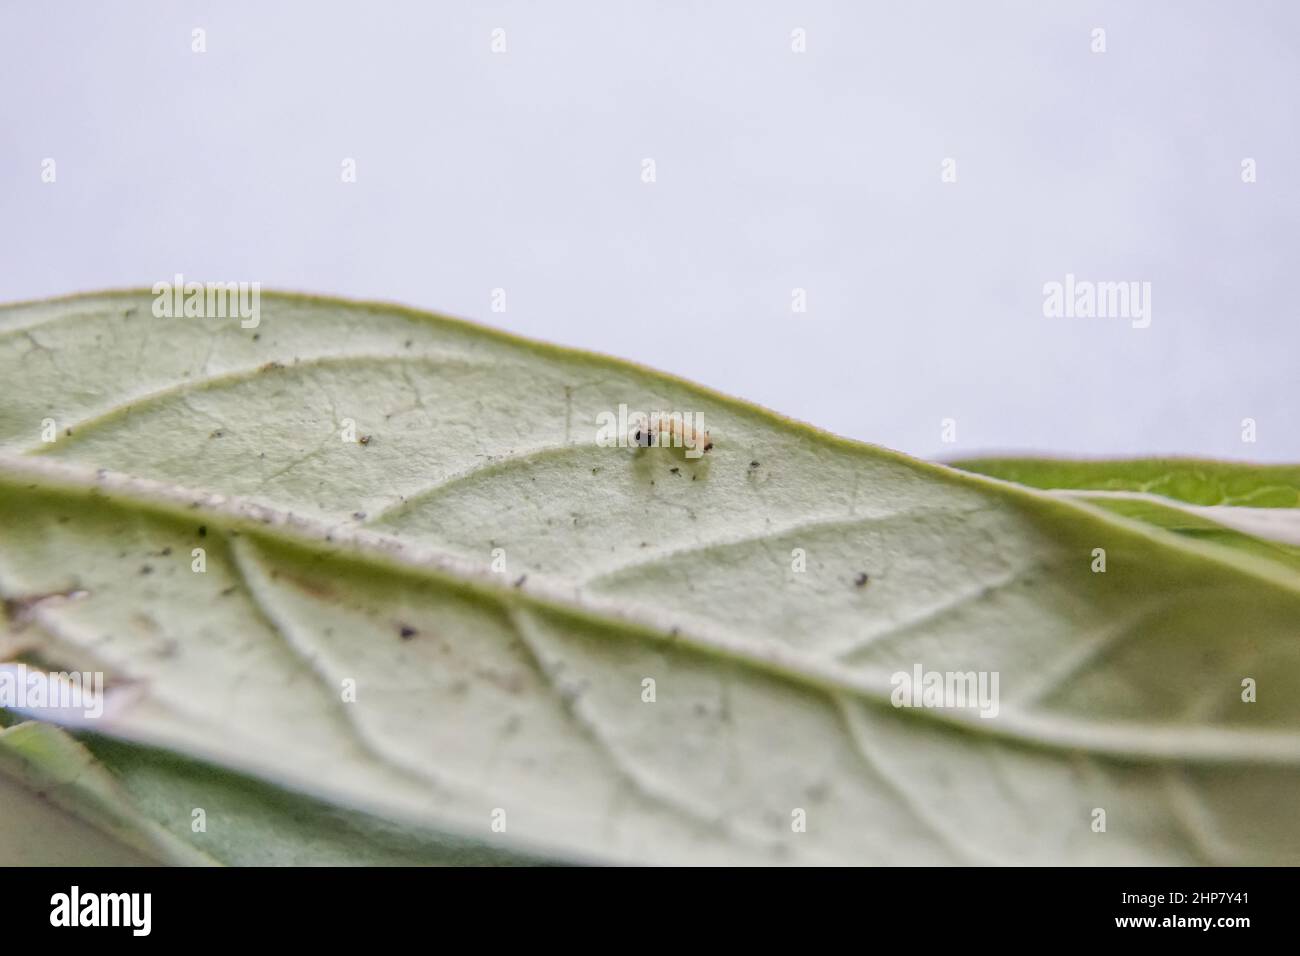 First instar Monarch caterpillar walking on leaf. Tiny caterpillar of Plain Tiger butterfly crawling on Milkweed leaf. New born caterpillar. Baby cate Stock Photo